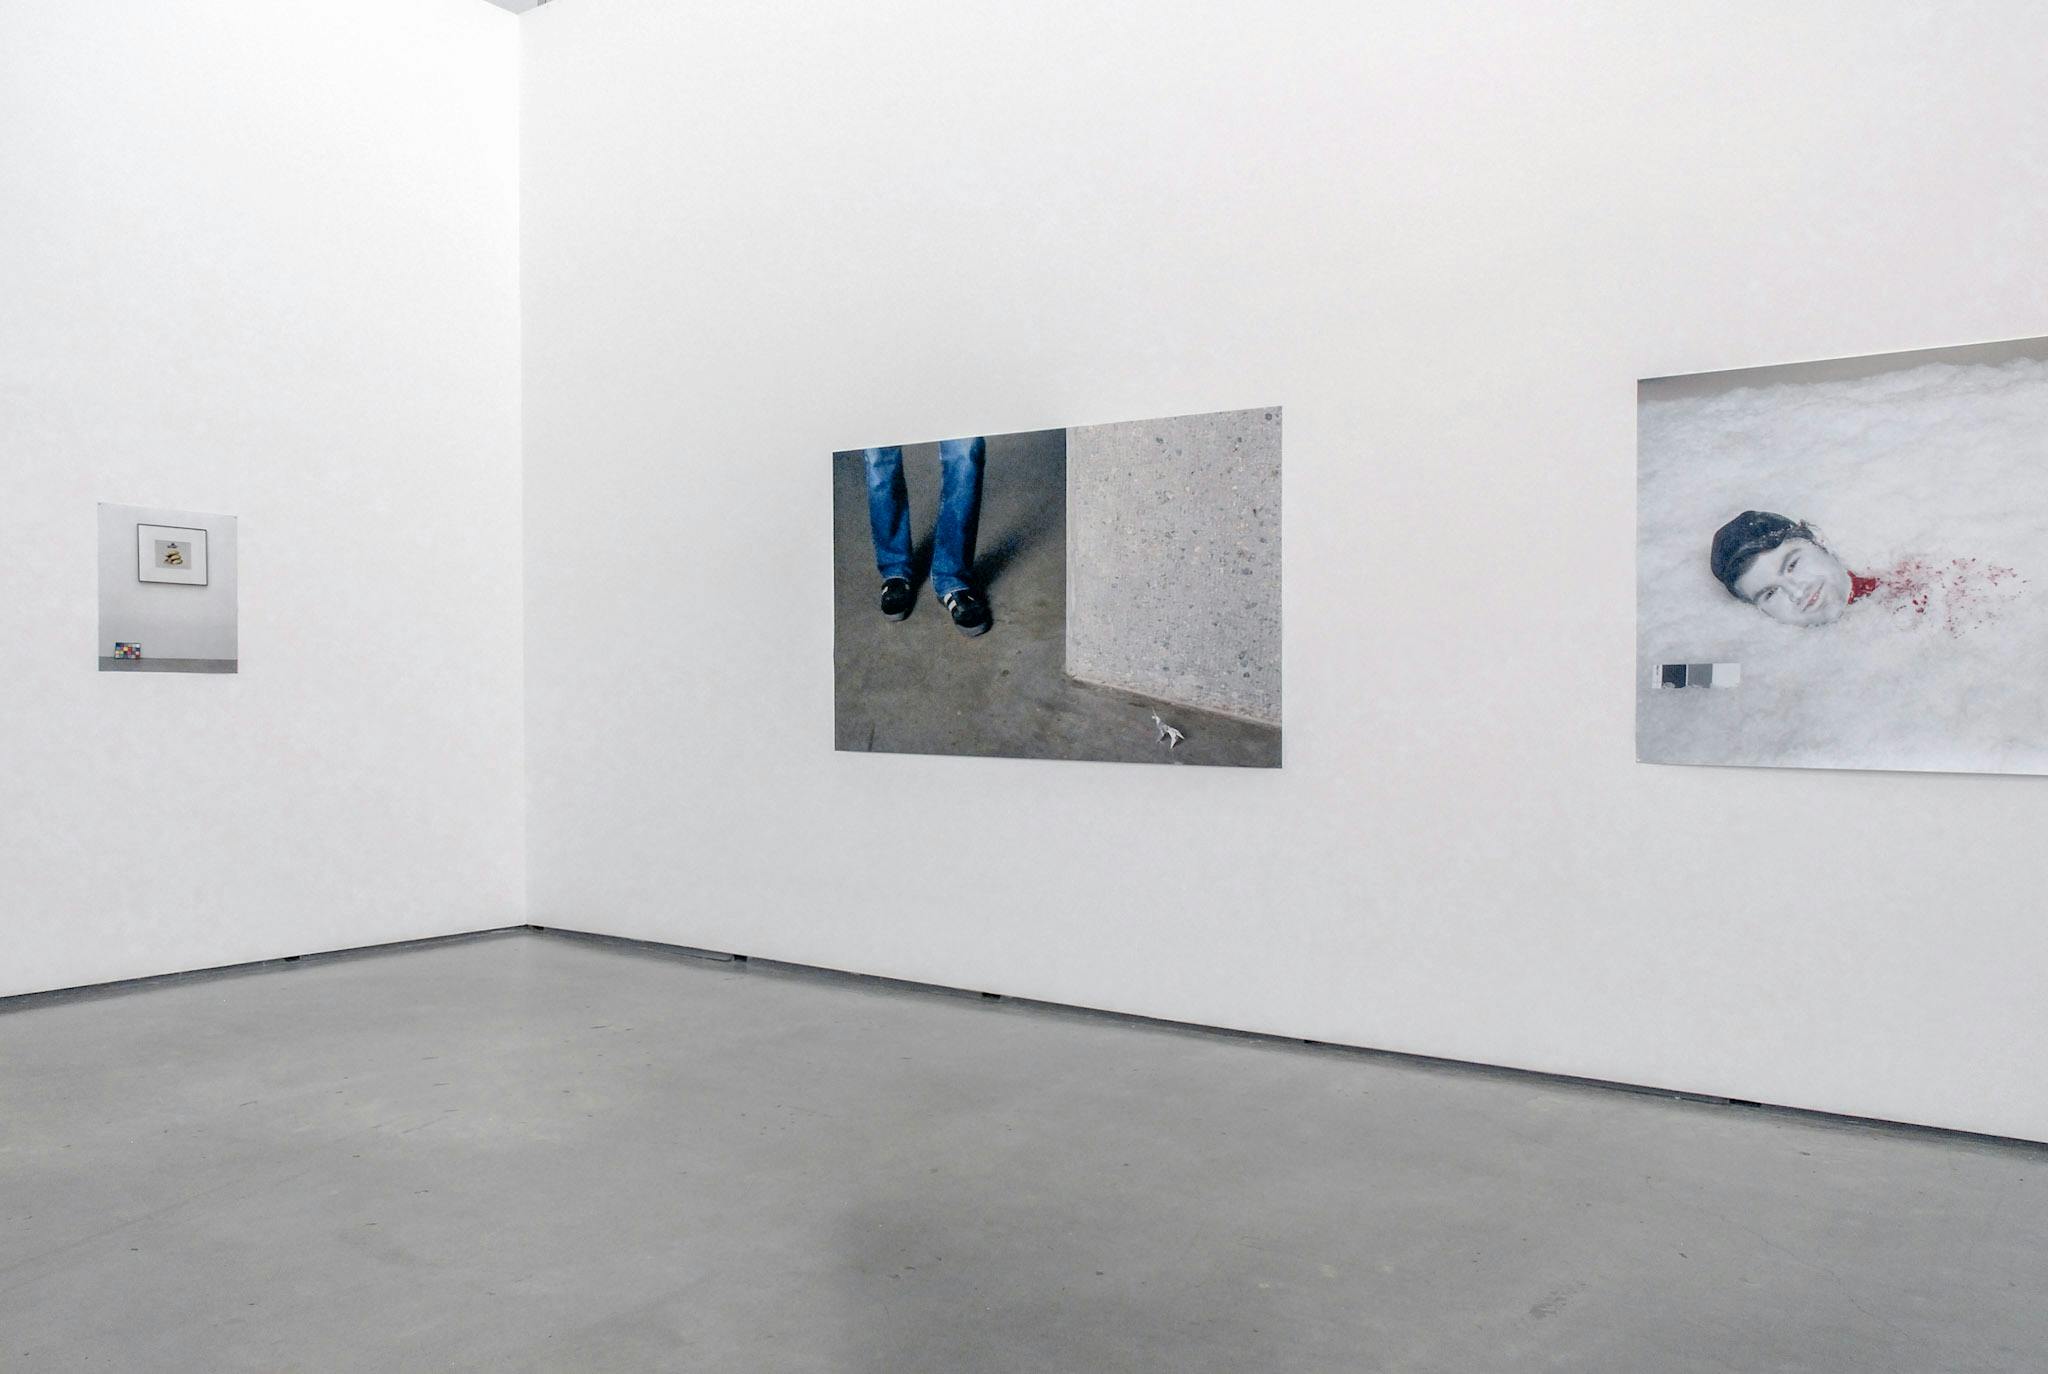 Three photographs on the gallery walls are visible in this image. The photo in the middle shows a person’s feet standing at the corner of a room. The person wears a pair of blue jeans. 